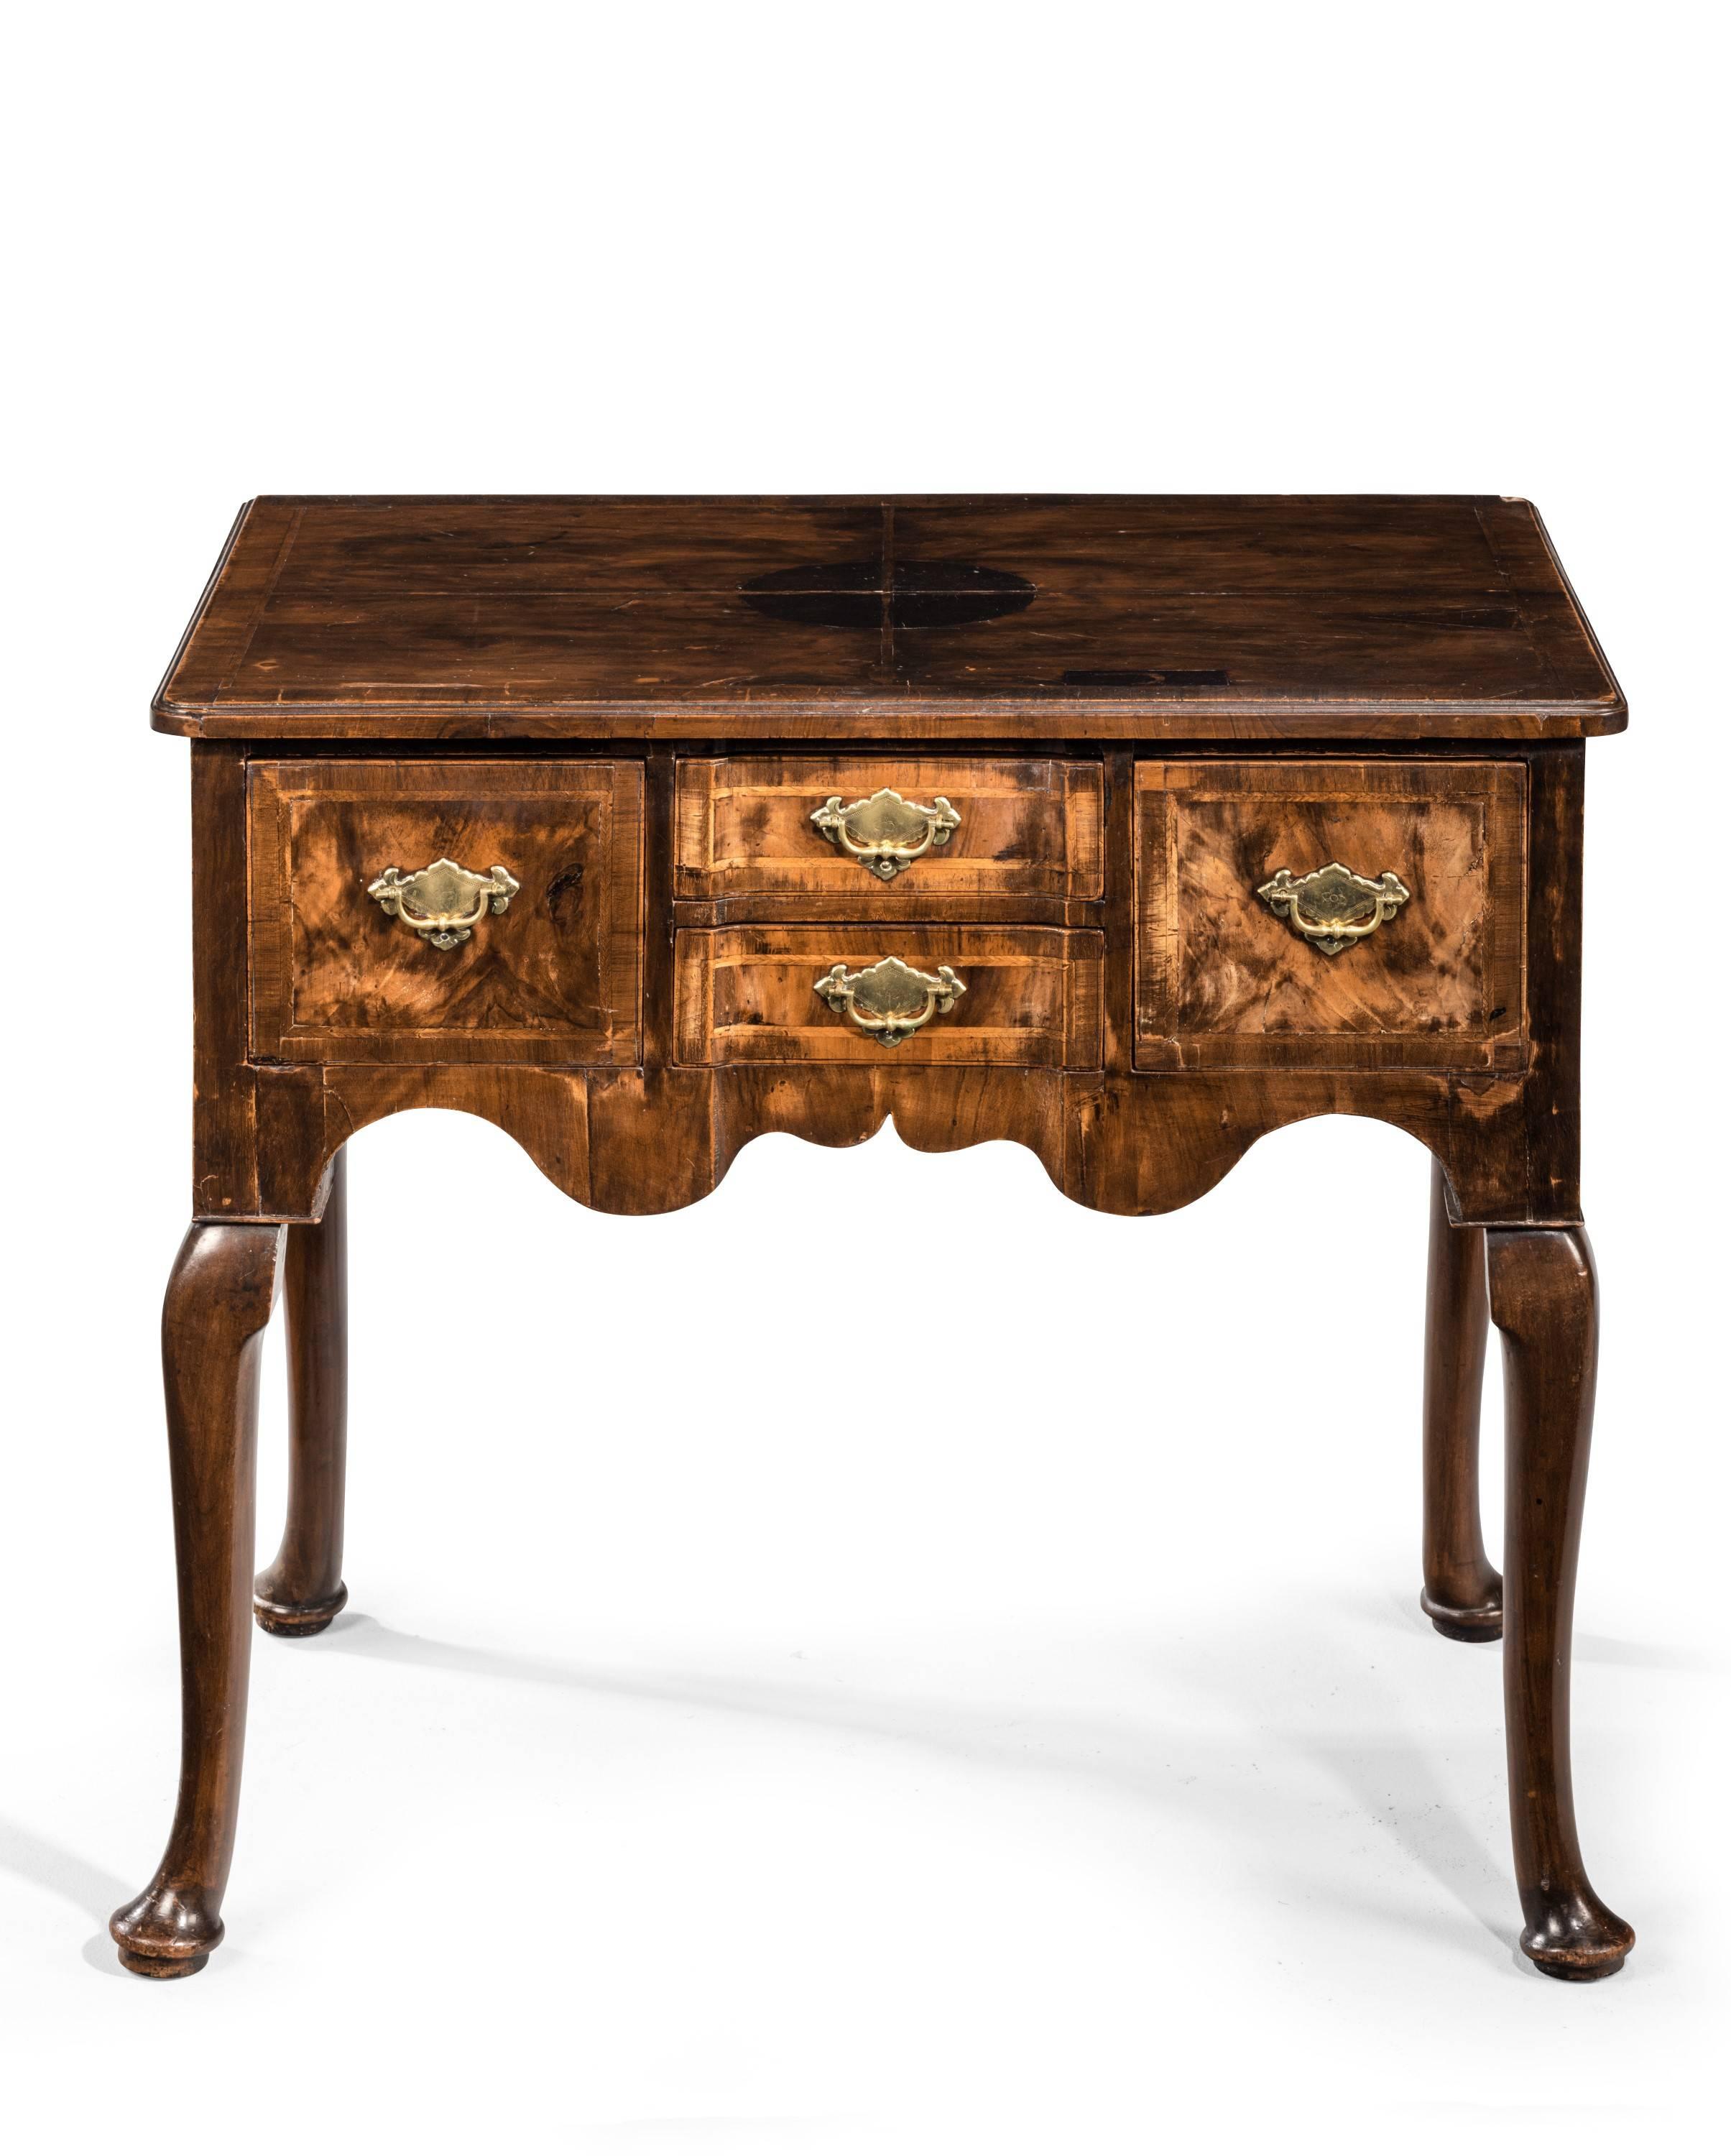 A mid-18th century walnut lowboy. With unusual concave section the two central tops. Quartered top with some restorations, broadly cross banded. Well shaped cabriole supports.